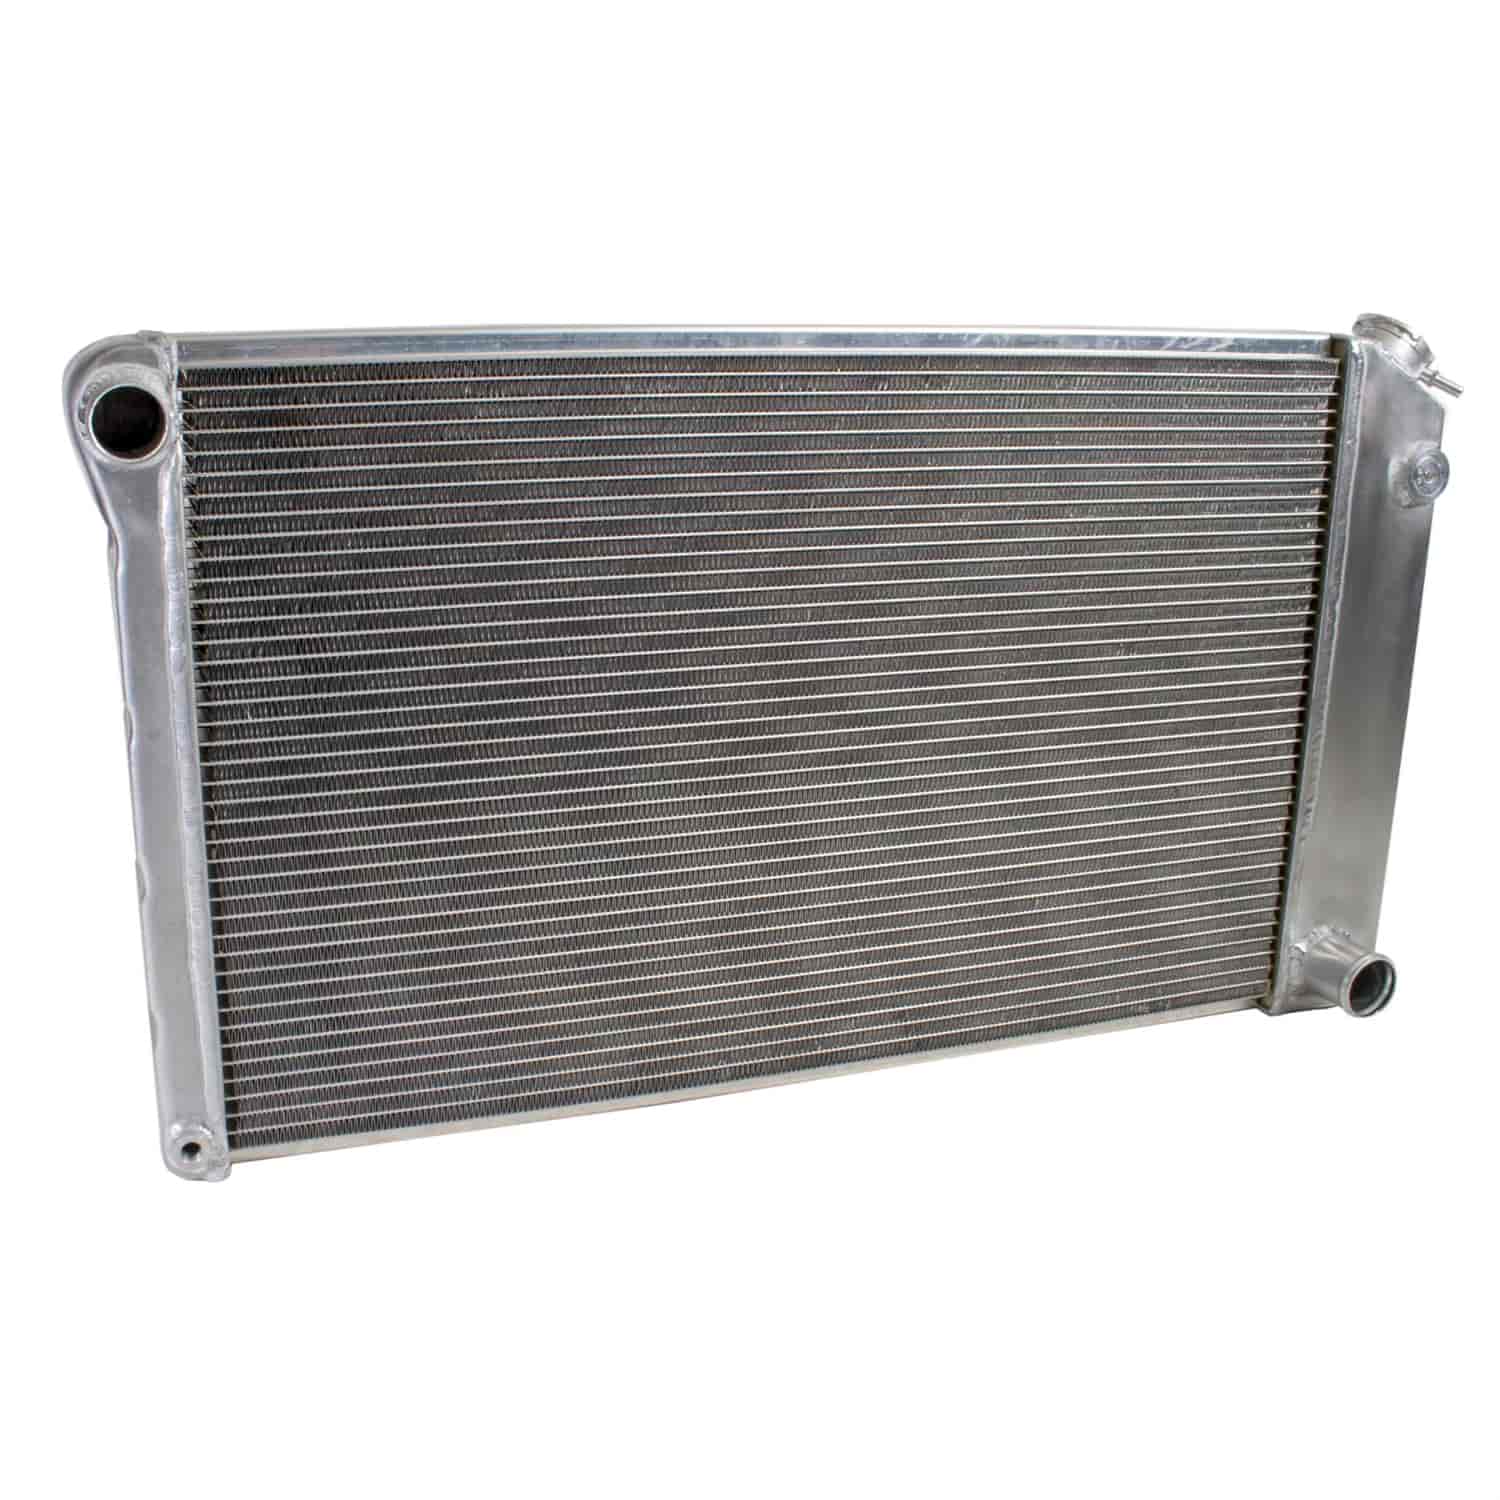 ExactFit Radiator for GM 1968-1977 A Body, 1978-1988